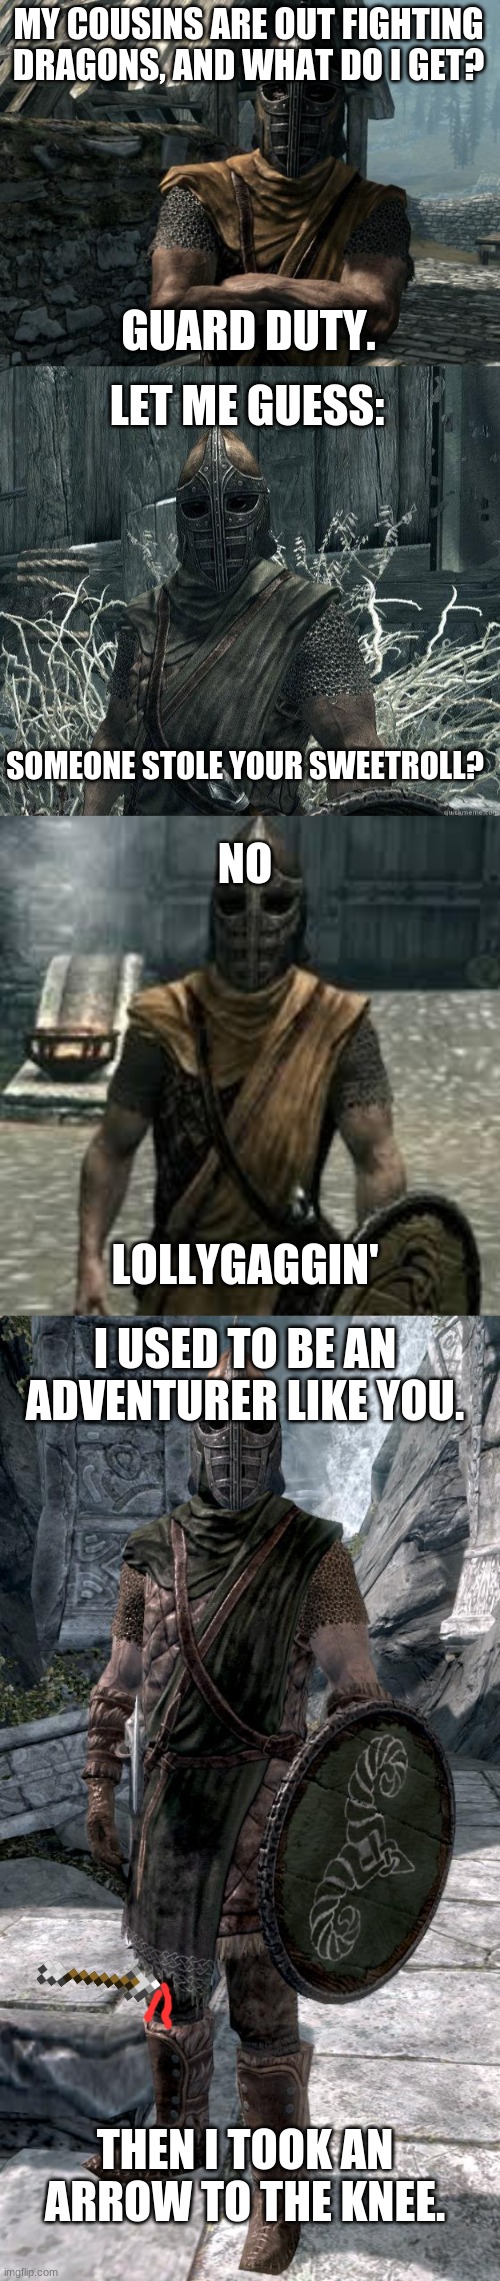 MY COUSINS ARE OUT FIGHTING DRAGONS, AND WHAT DO I GET? GUARD DUTY. LET ME GUESS:; SOMEONE STOLE YOUR SWEETROLL? NO; LOLLYGAGGIN'; I USED TO BE AN ADVENTURER LIKE YOU. THEN I TOOK AN ARROW TO THE KNEE. | image tagged in skyrim guards be like,skyrimguard,arrow to the knee,skyrim guard | made w/ Imgflip meme maker